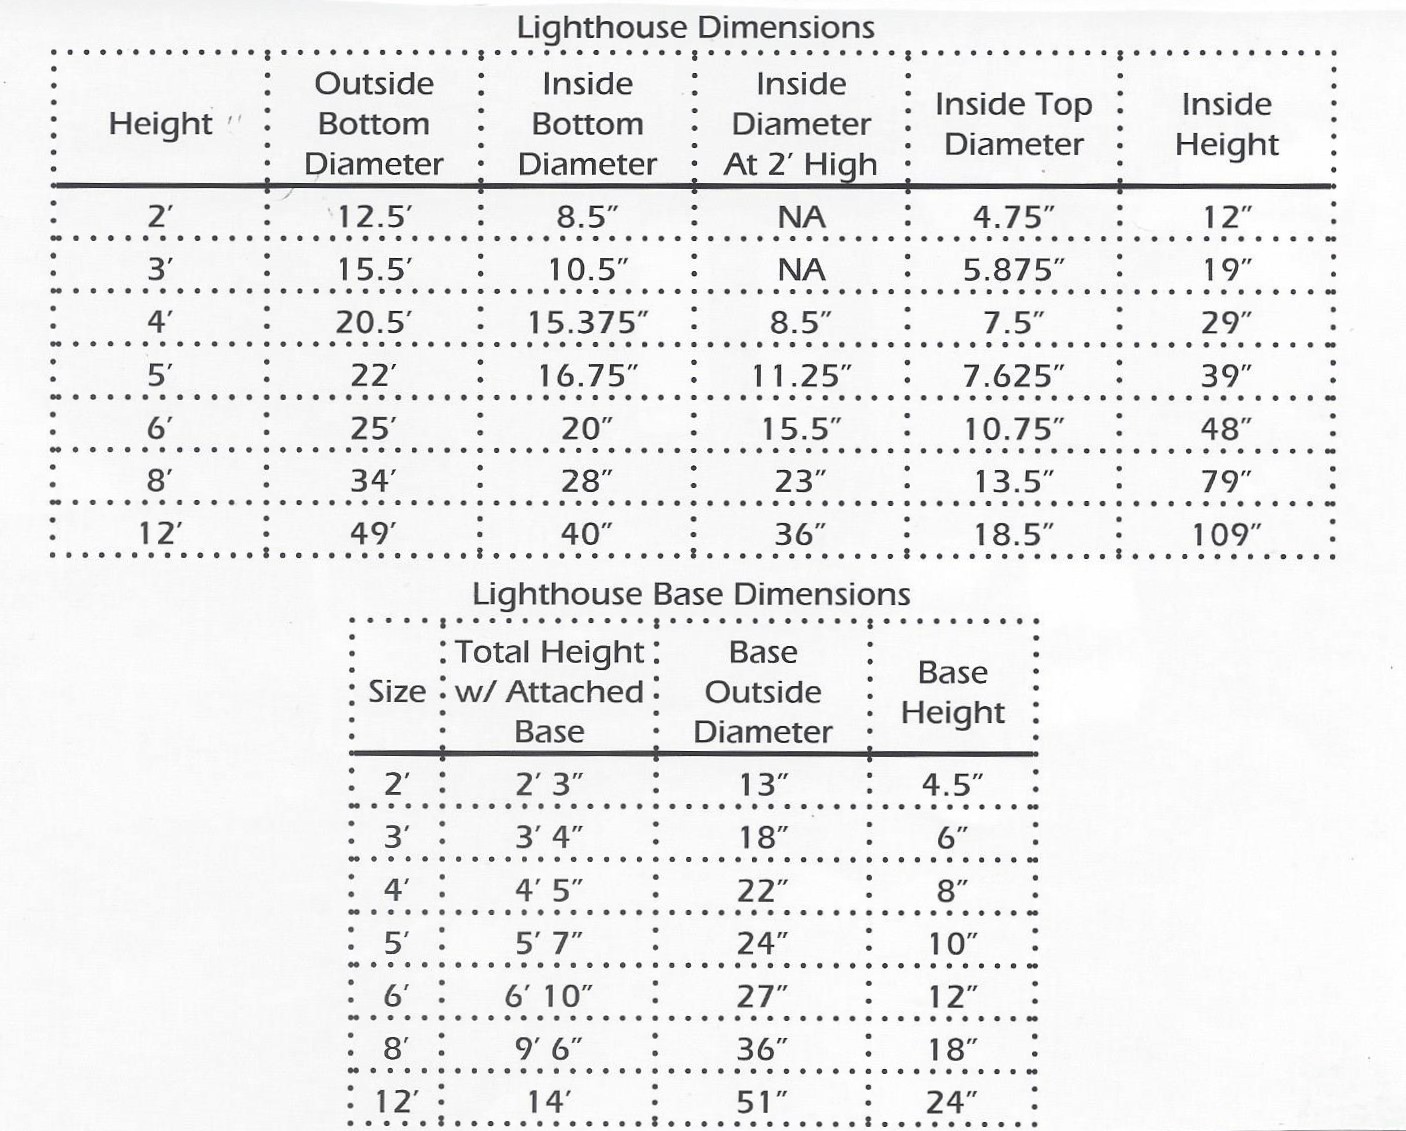 2023 Lighthouse Dimensions